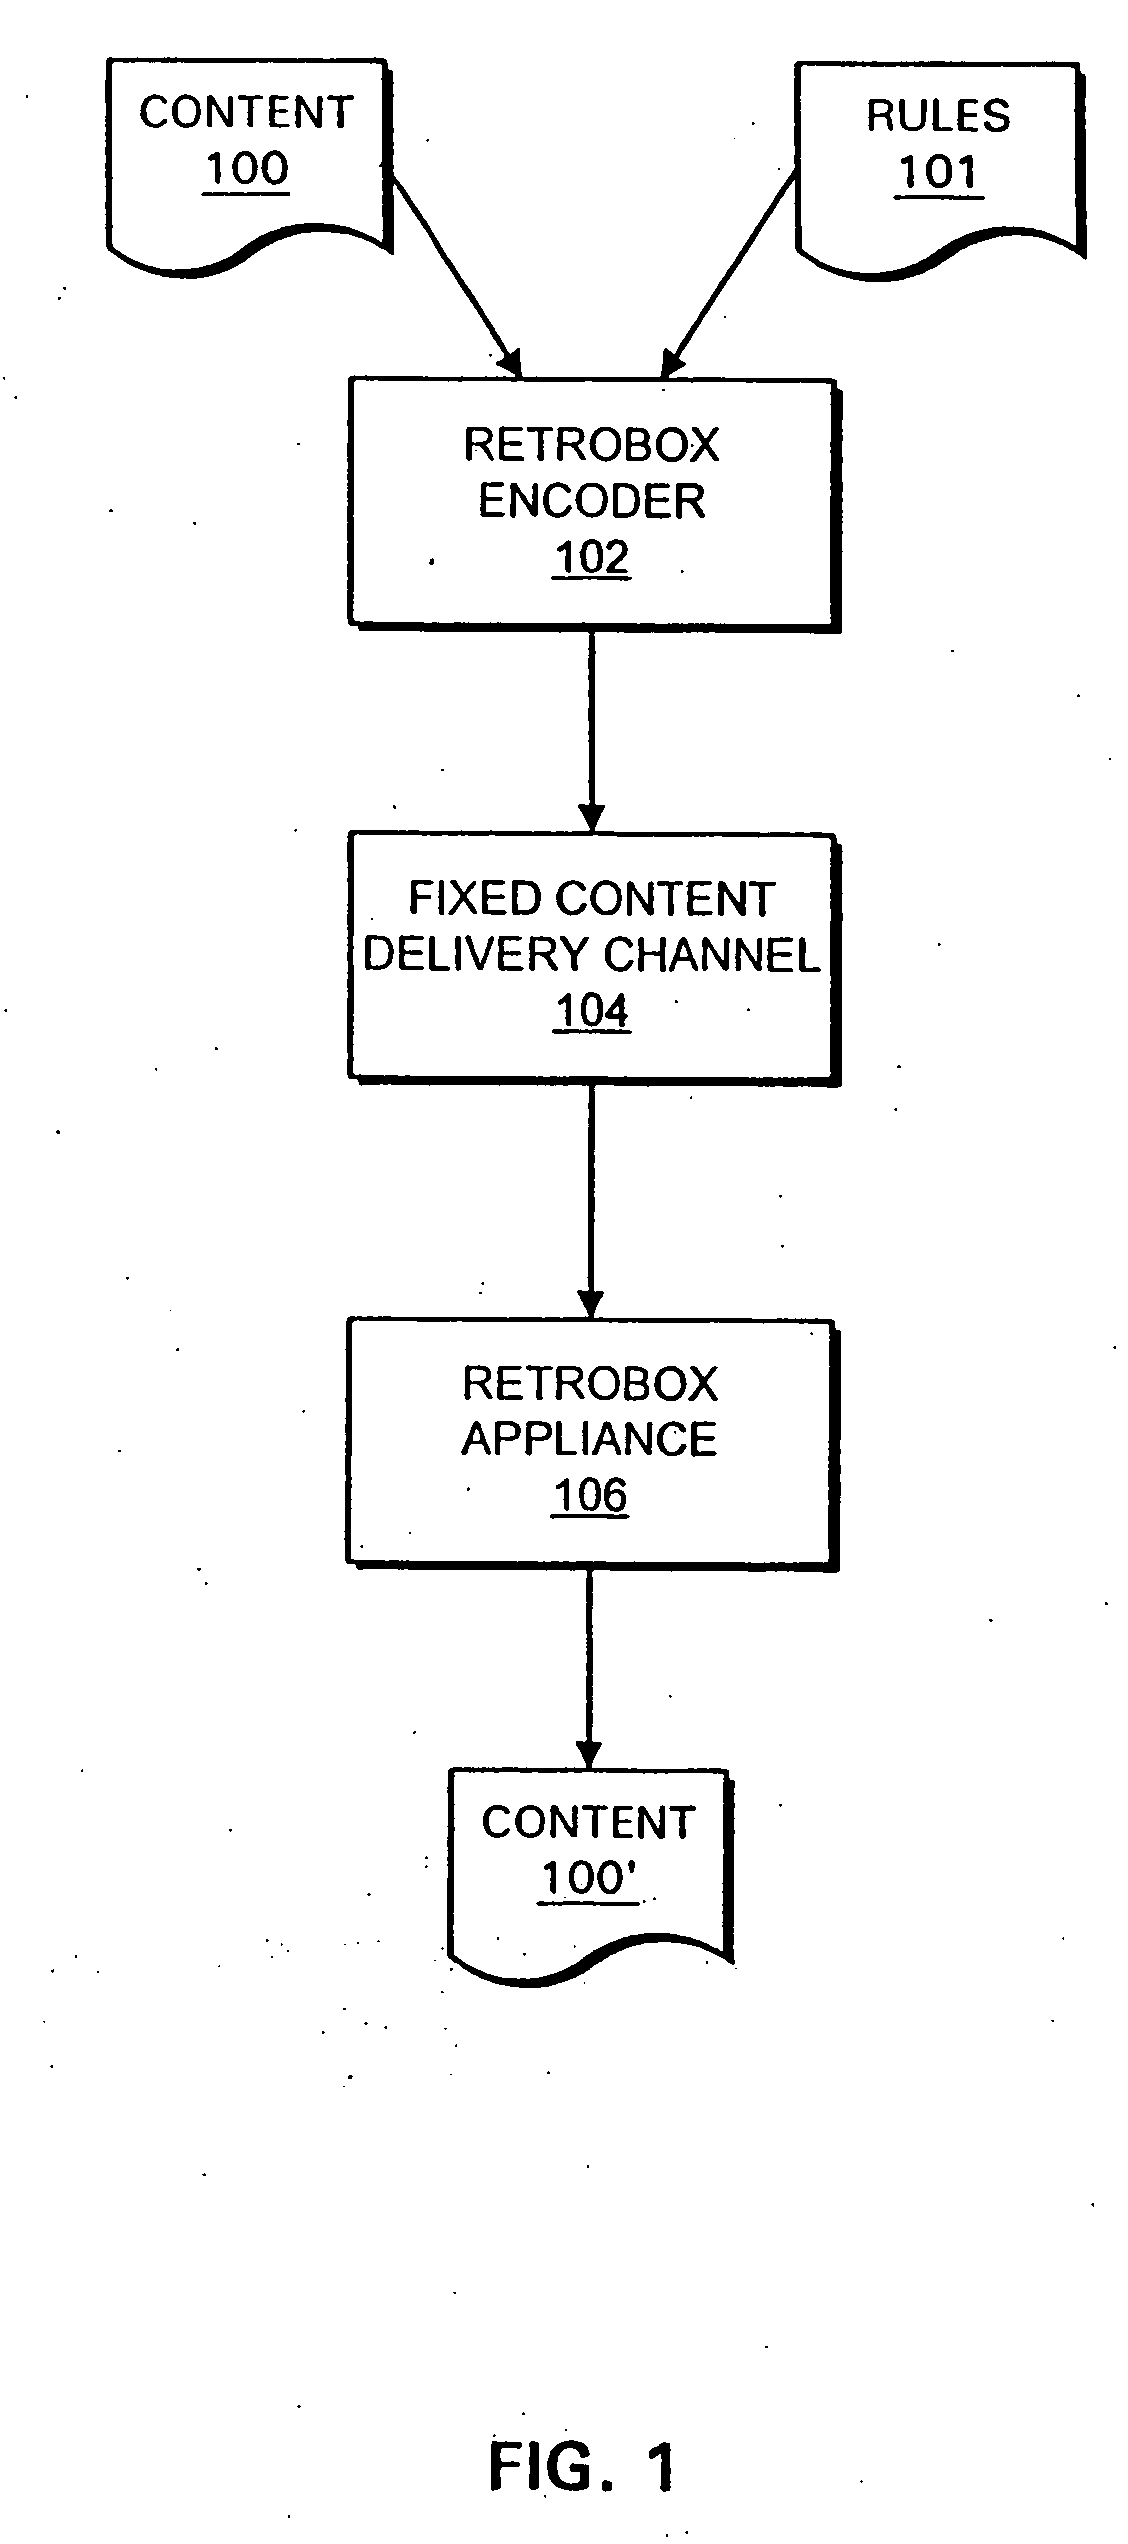 Systems and methods for retrofitting electronic appliances to accept different content formats